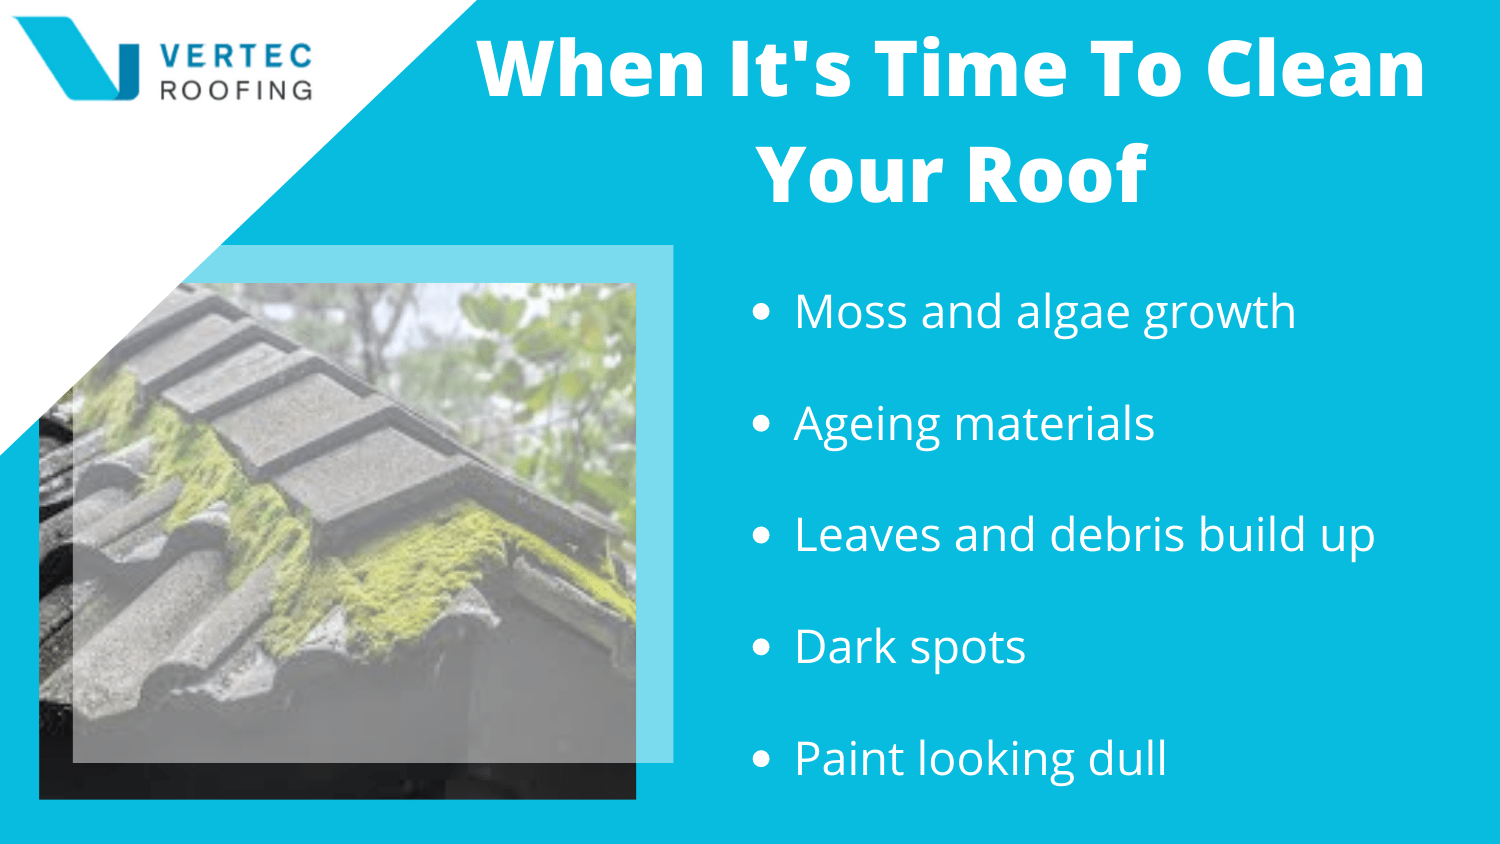 when it's time to clean your roof